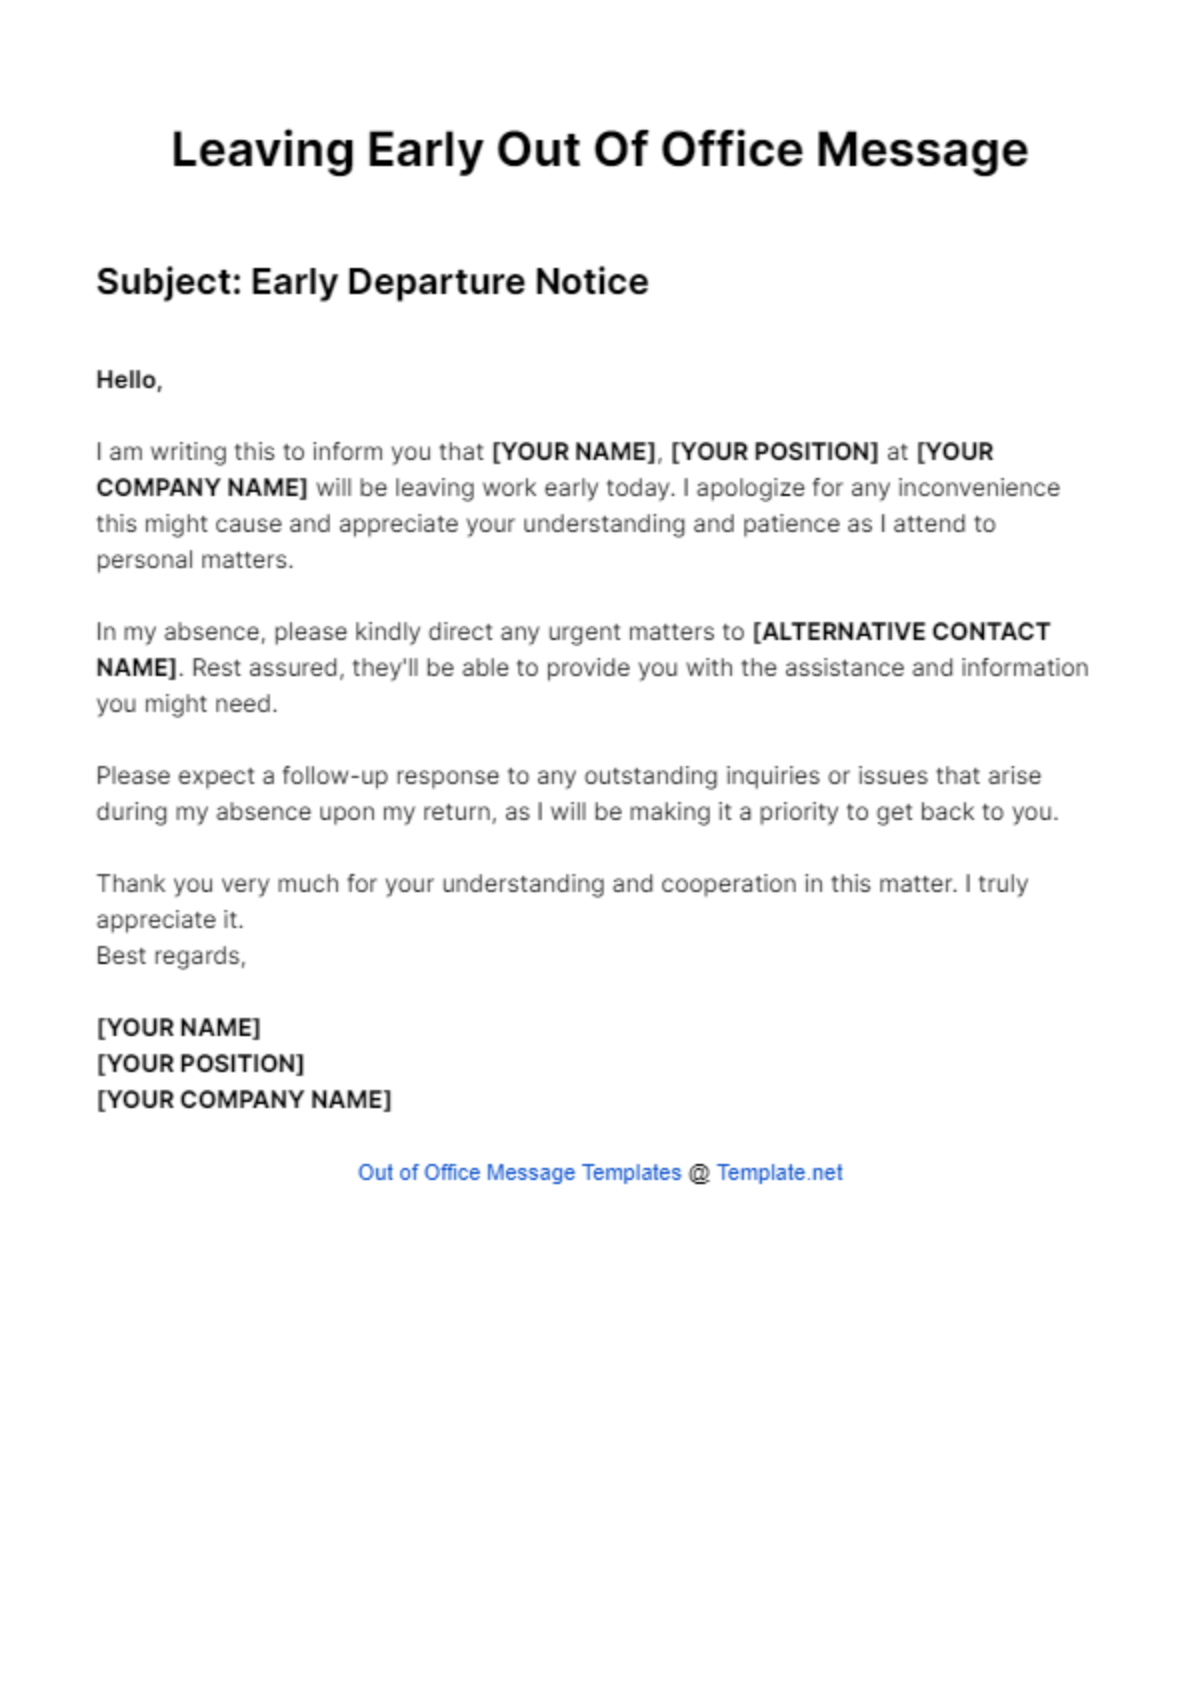 Leaving Early Out Of Office Message Template